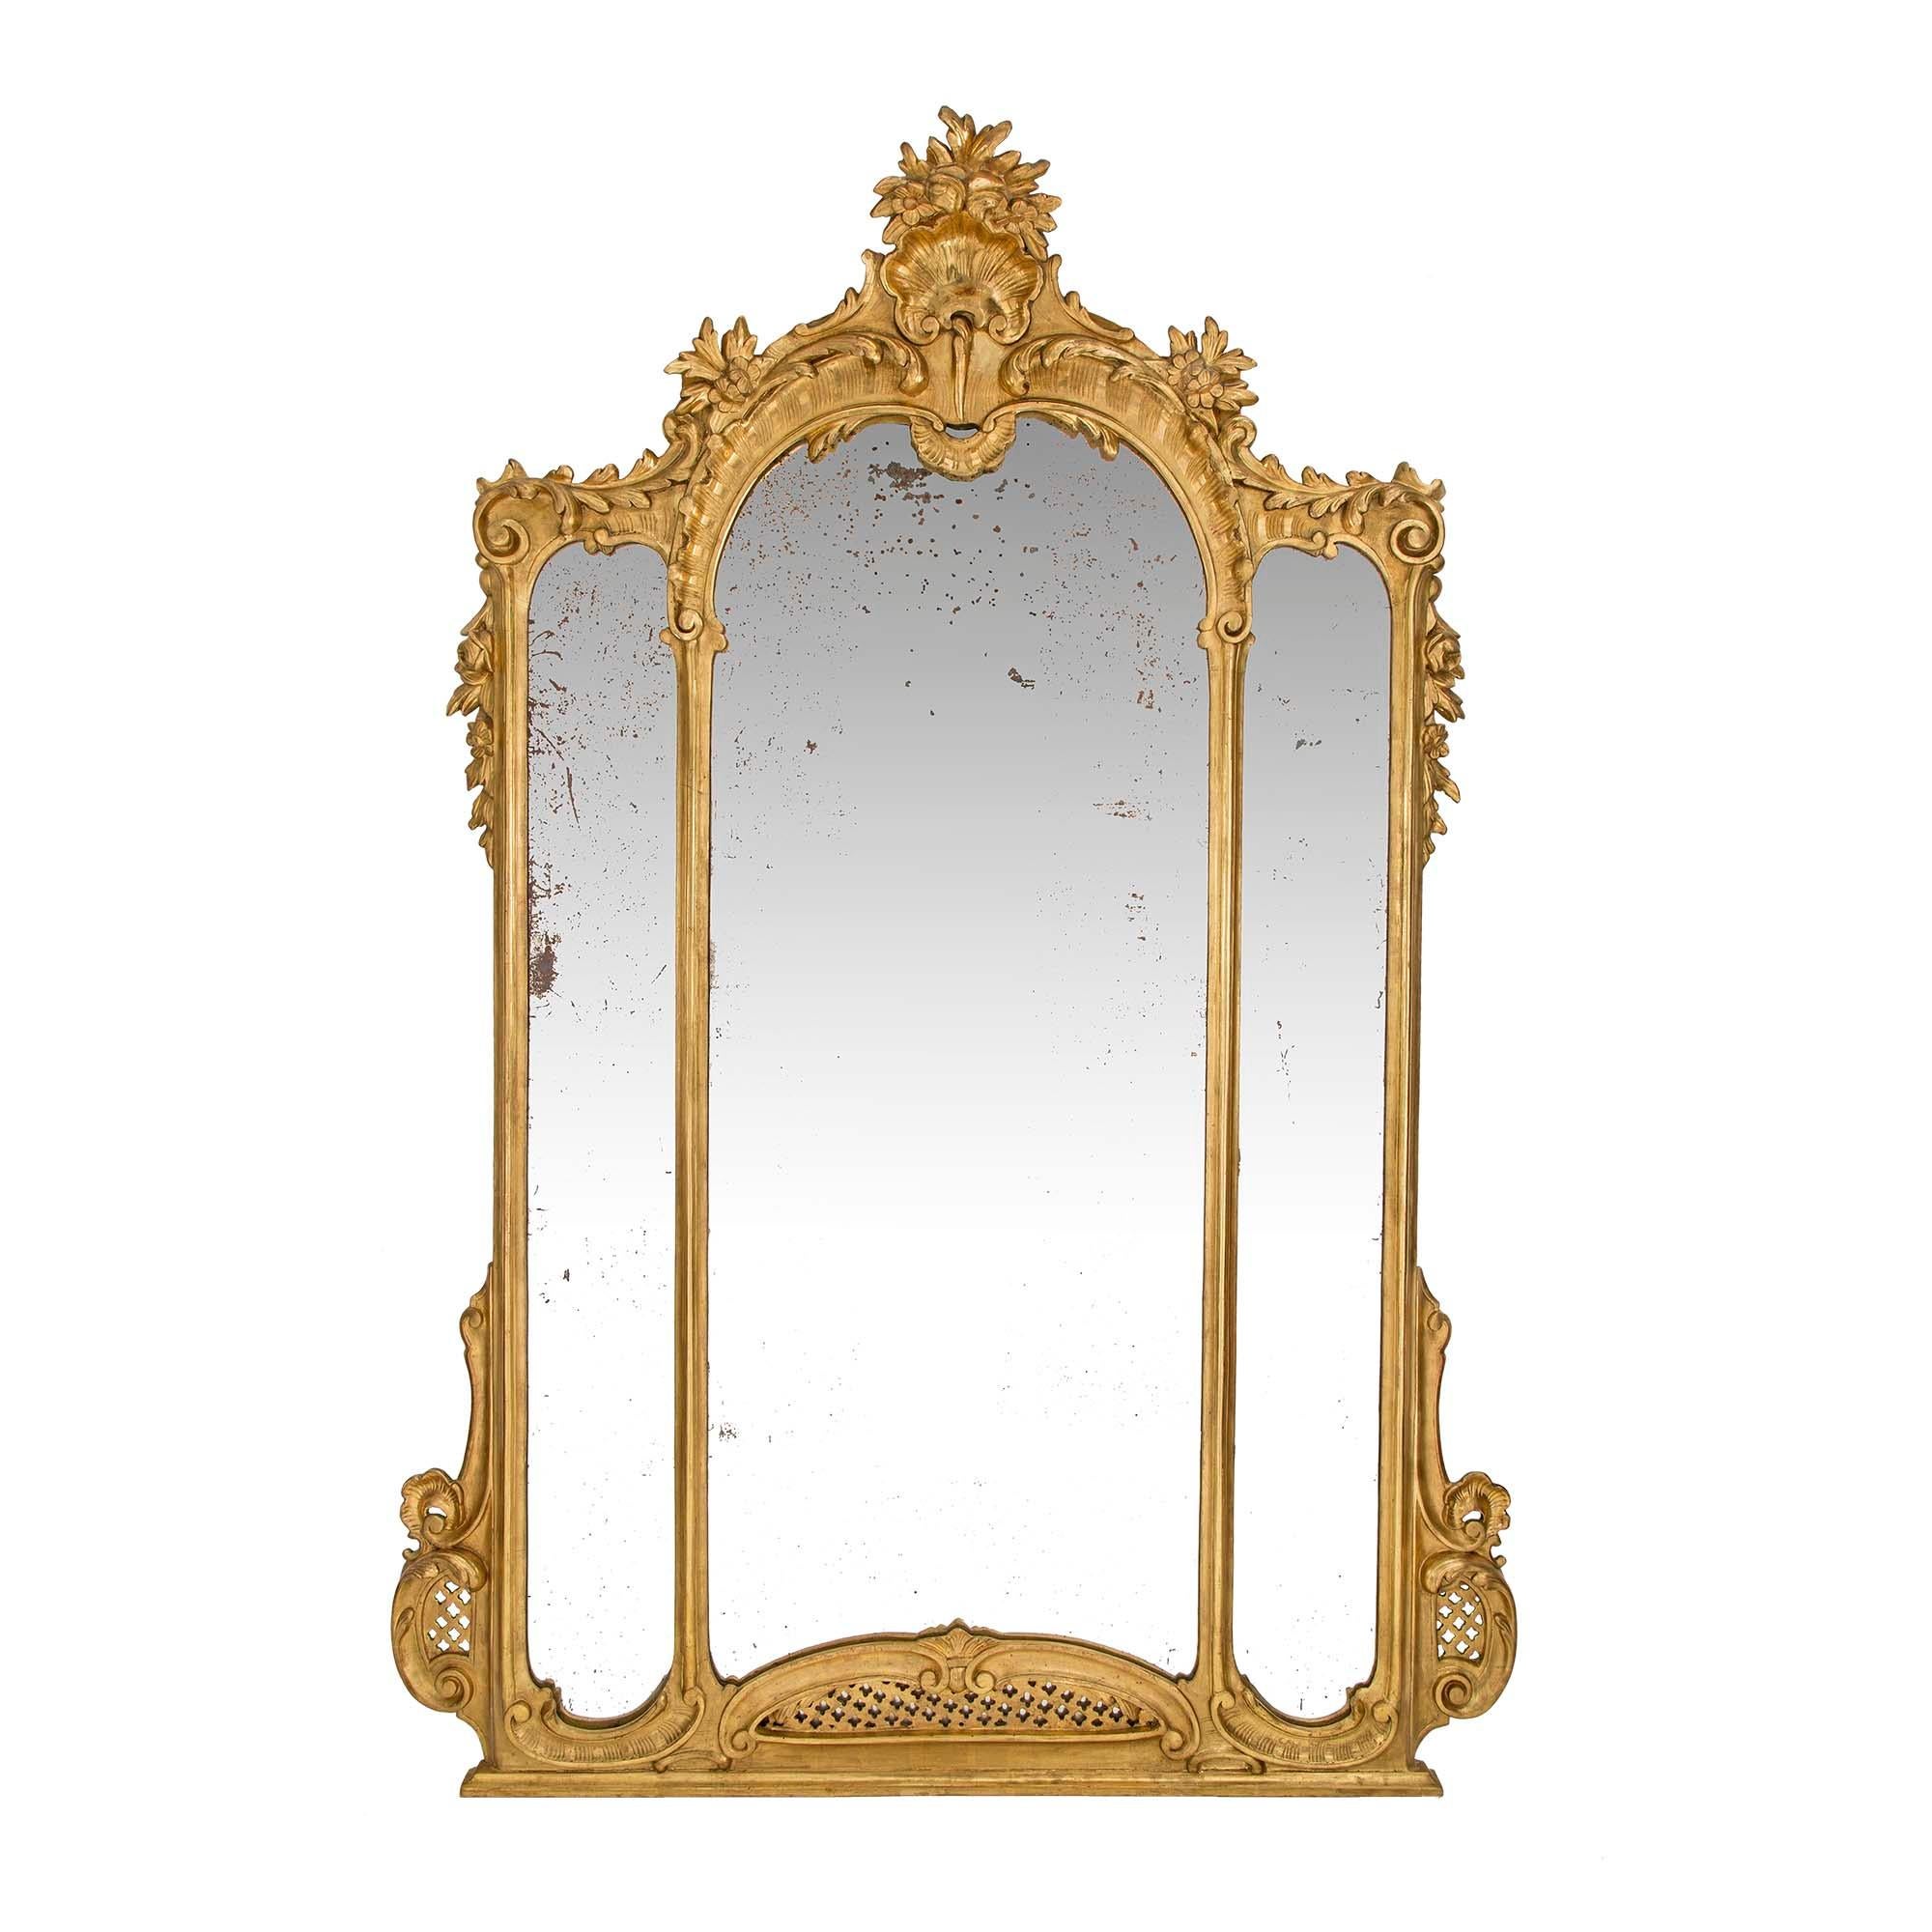 A handsome and large scale pair of Italian 19th century Louis XV st. giltwood mirrors. Each mirror has three mirror plates within the double frame. At the straight base are lovely foliate scrolls and a pierced rosette design repeated at each side.